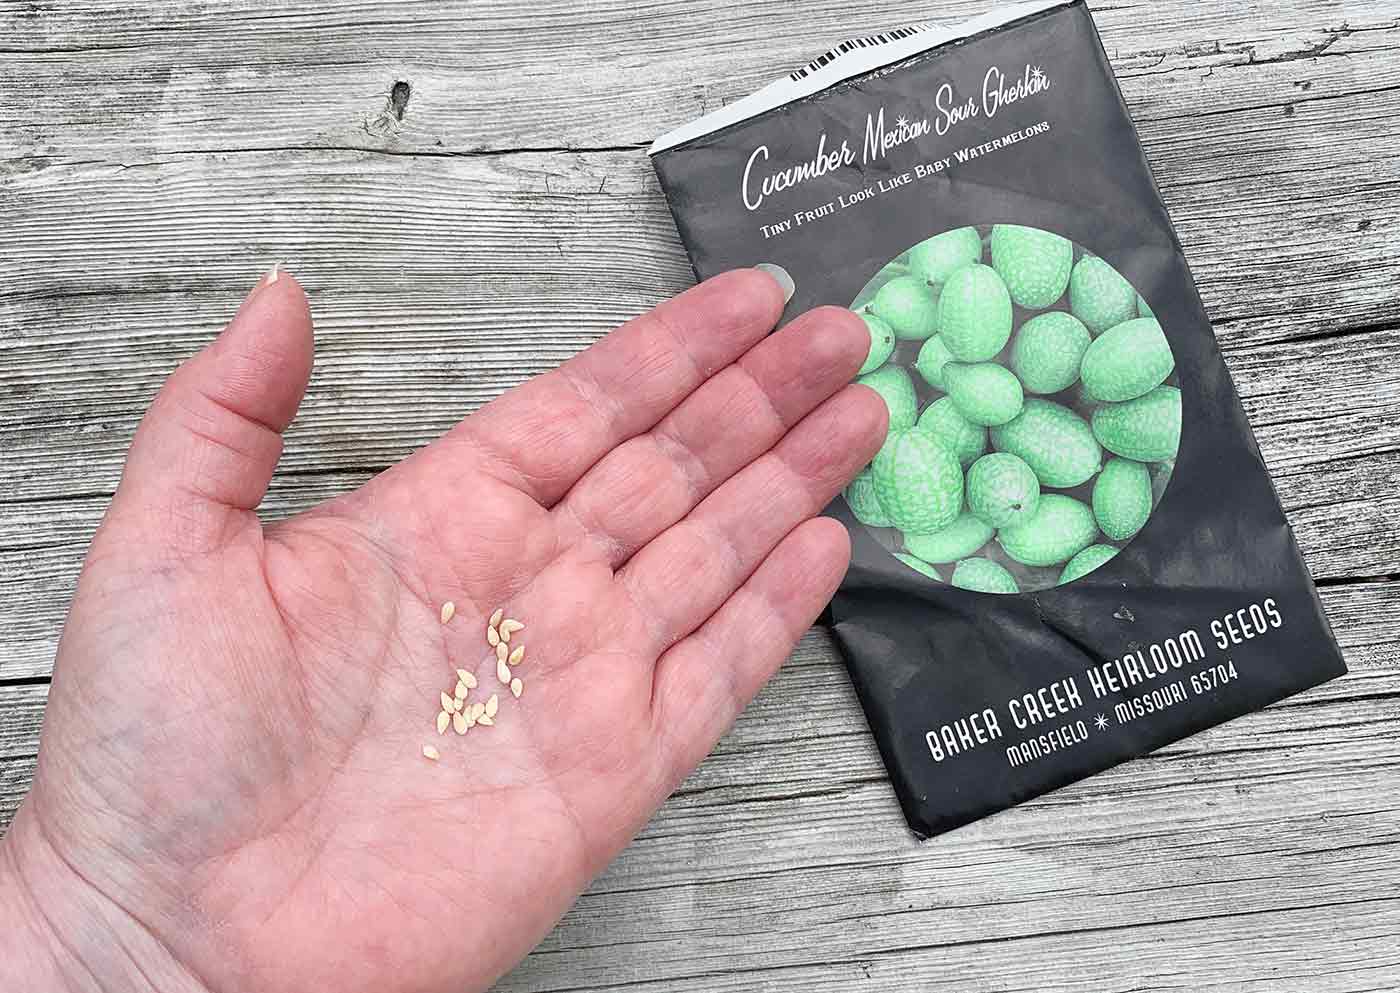 Seeds and seed packet for cucamelon